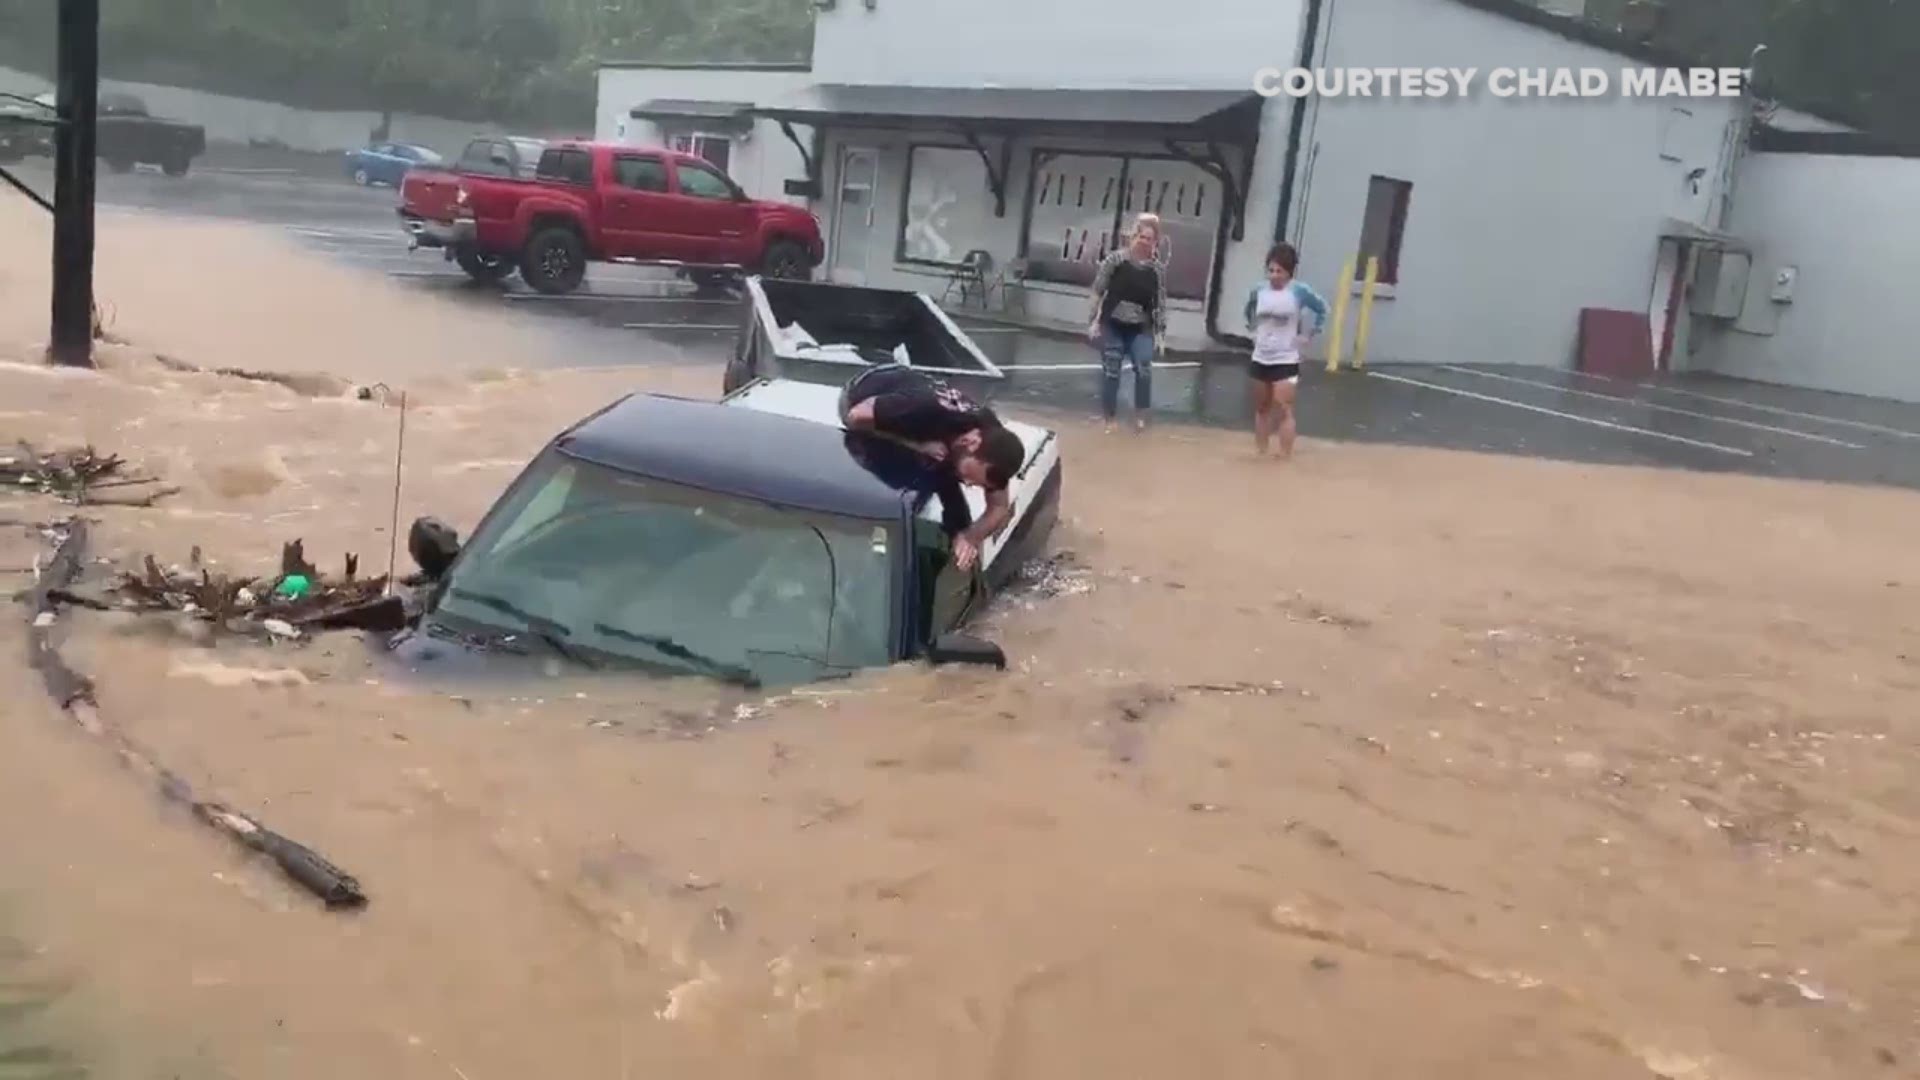 A man in Winston-Salem has several guardian angels to thank after they rescued him from his truck after it was submerged in floodwater. The strangers pulled together, literally, to save him as his truck was sinking.